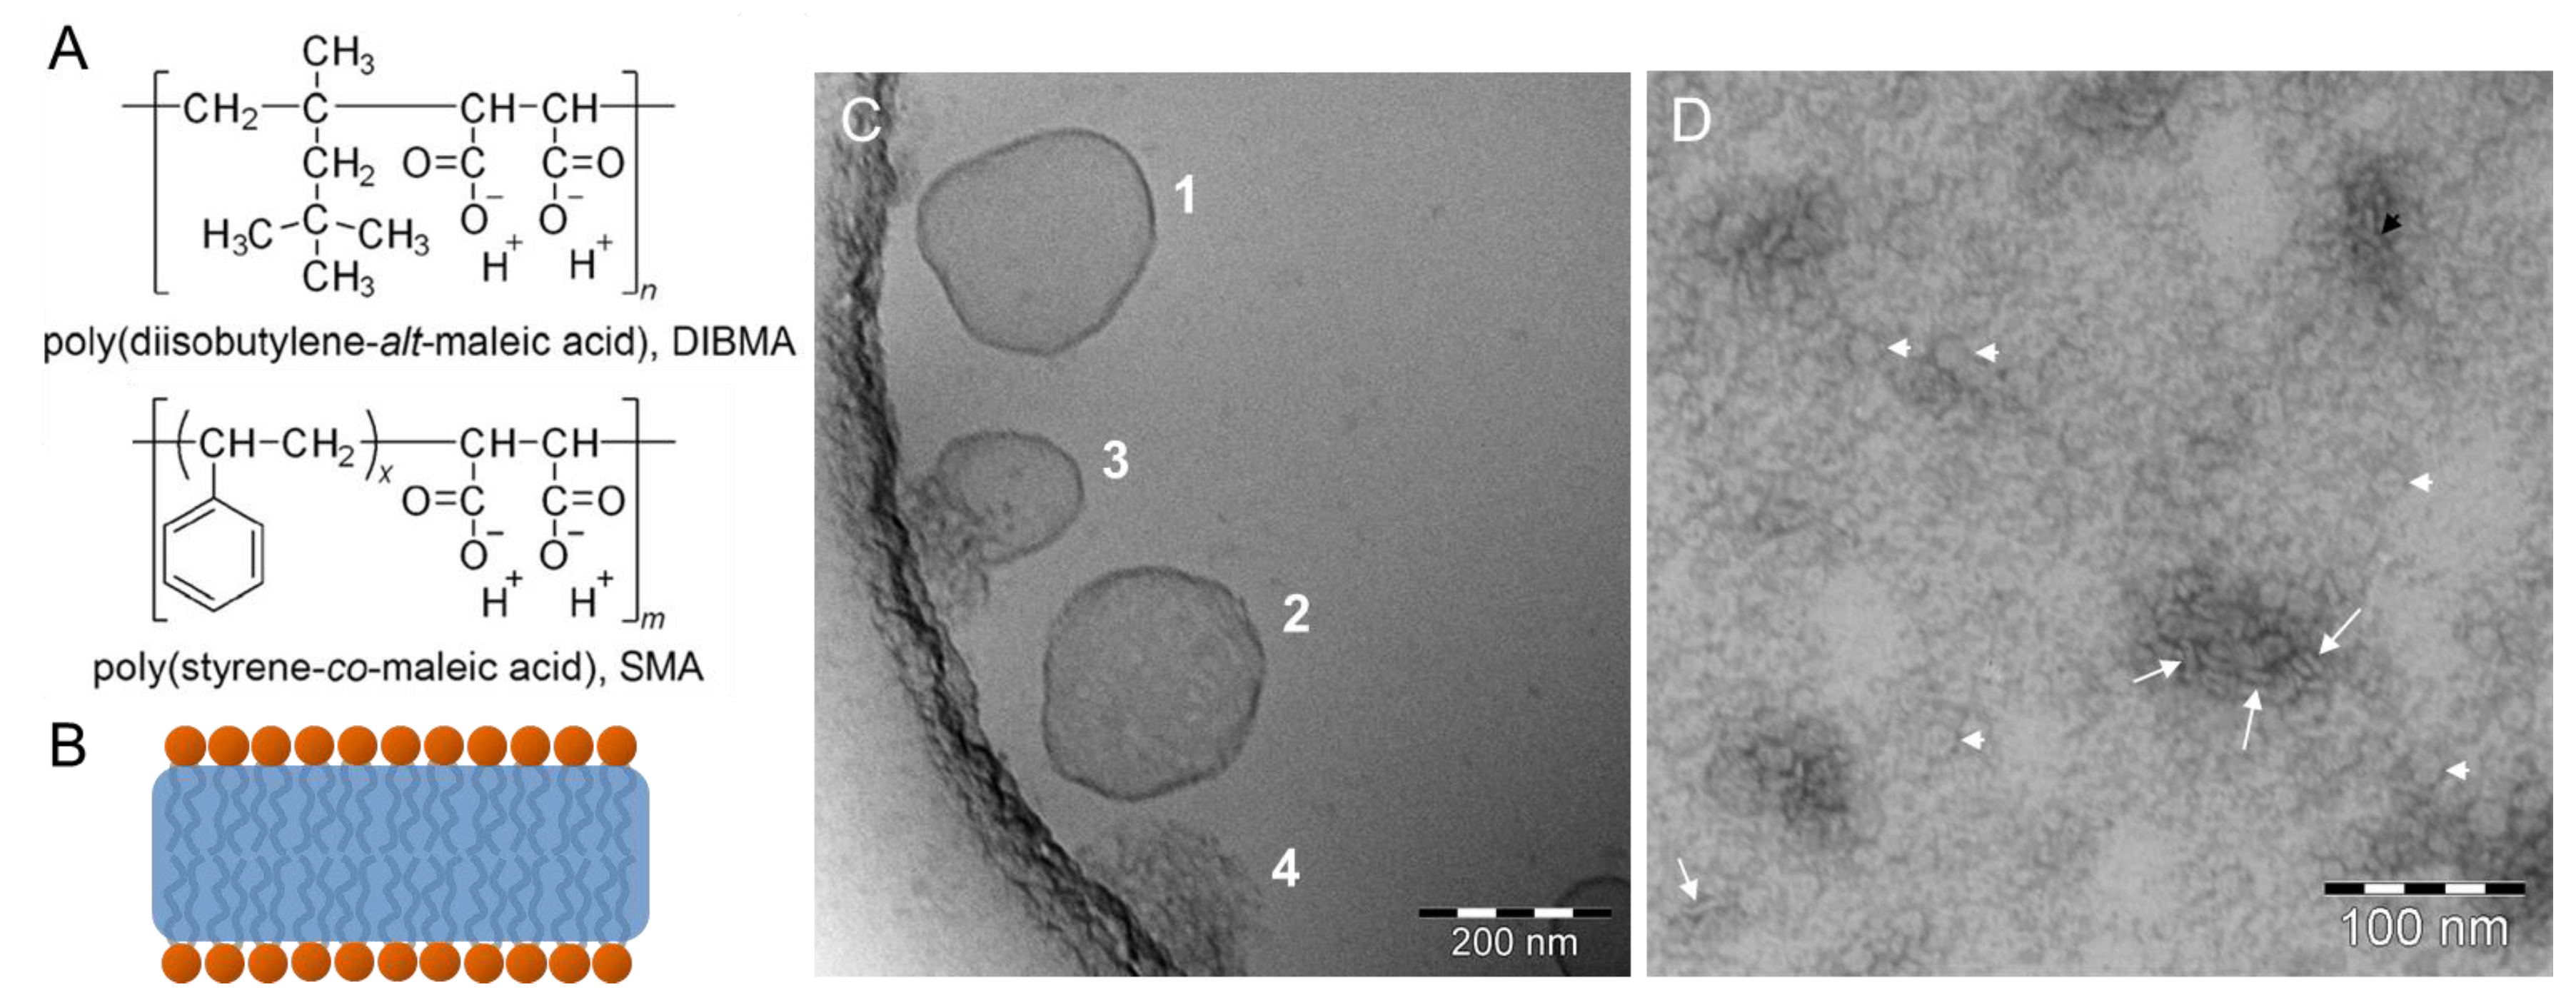 Polymers Free Full Text Cryo Transmission Electron Microscopy Of Phospholipid Model Membranes Interacting With Amphiphilic And Polyphilic Molecules Html